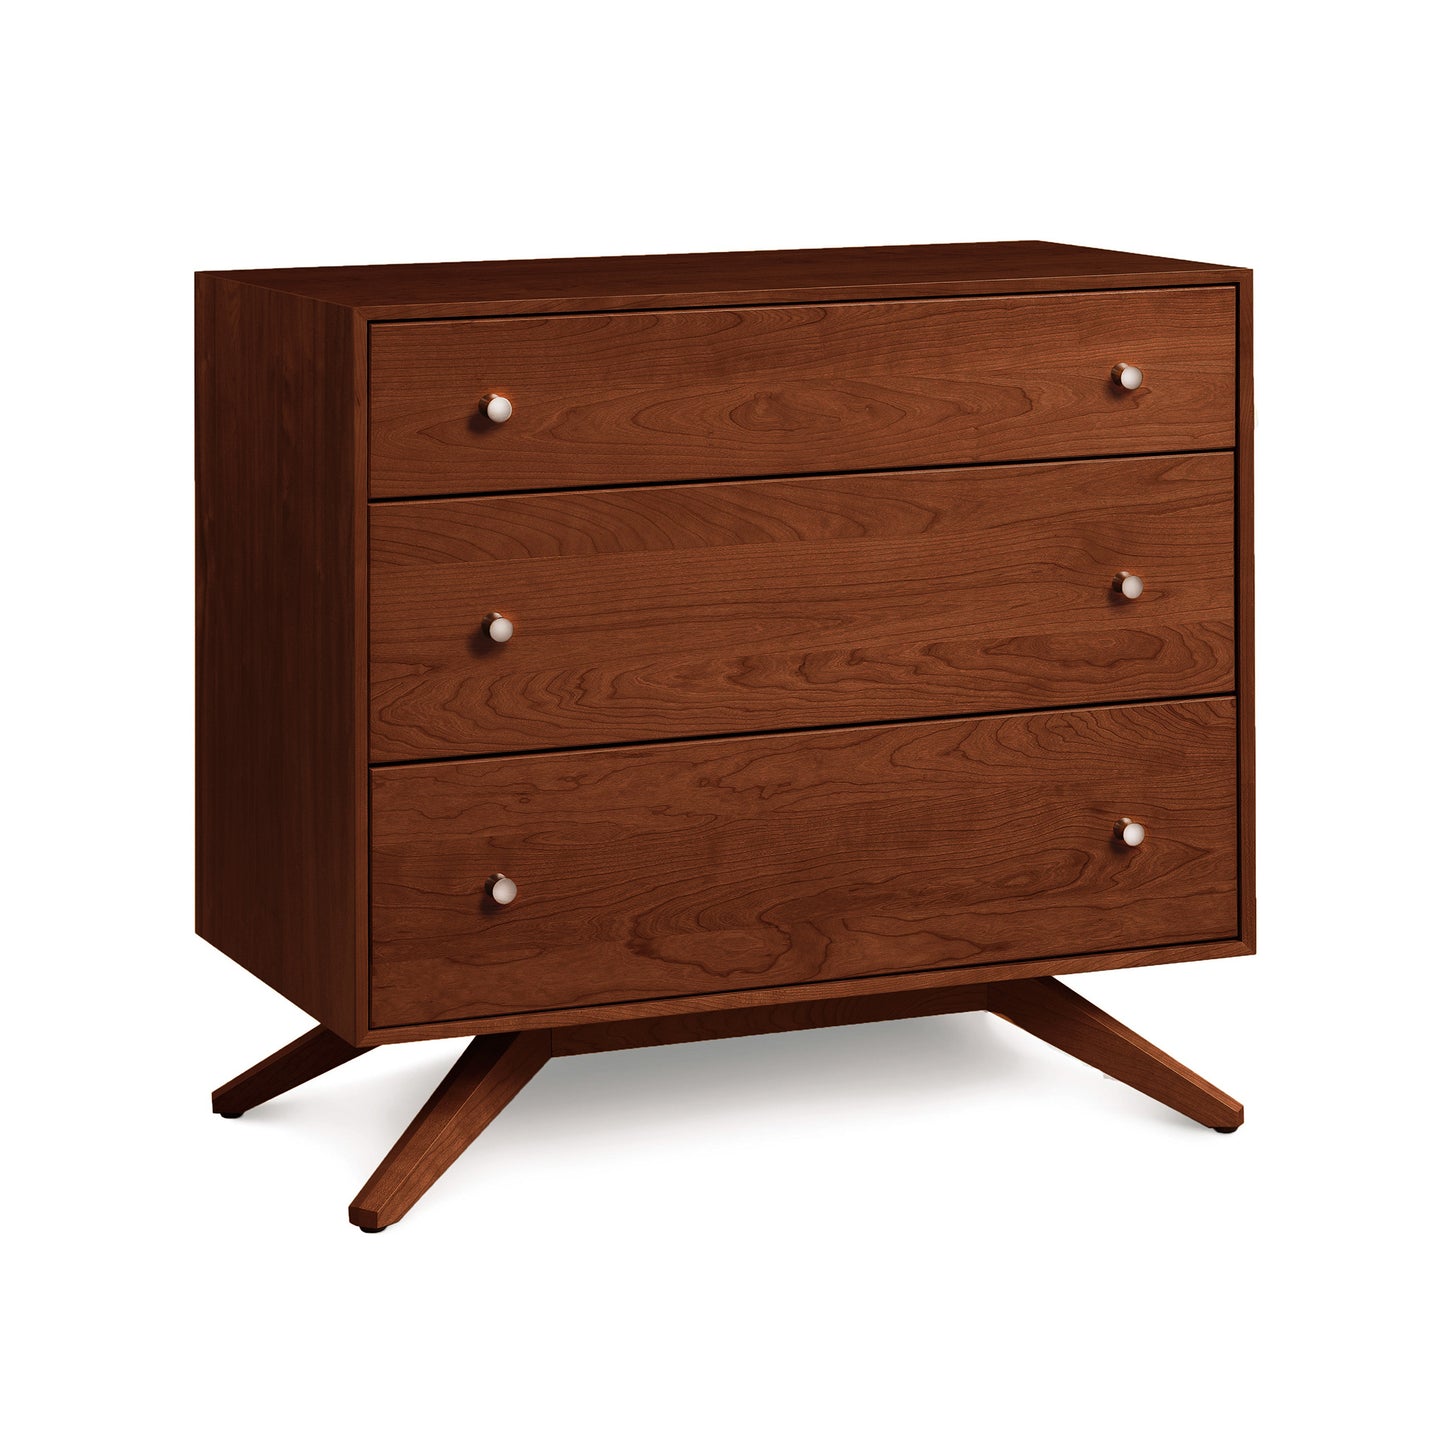 A Copeland Furniture Astrid 3-Drawer Chest in Mid Century Modern style with angled legs, isolated on a white background.